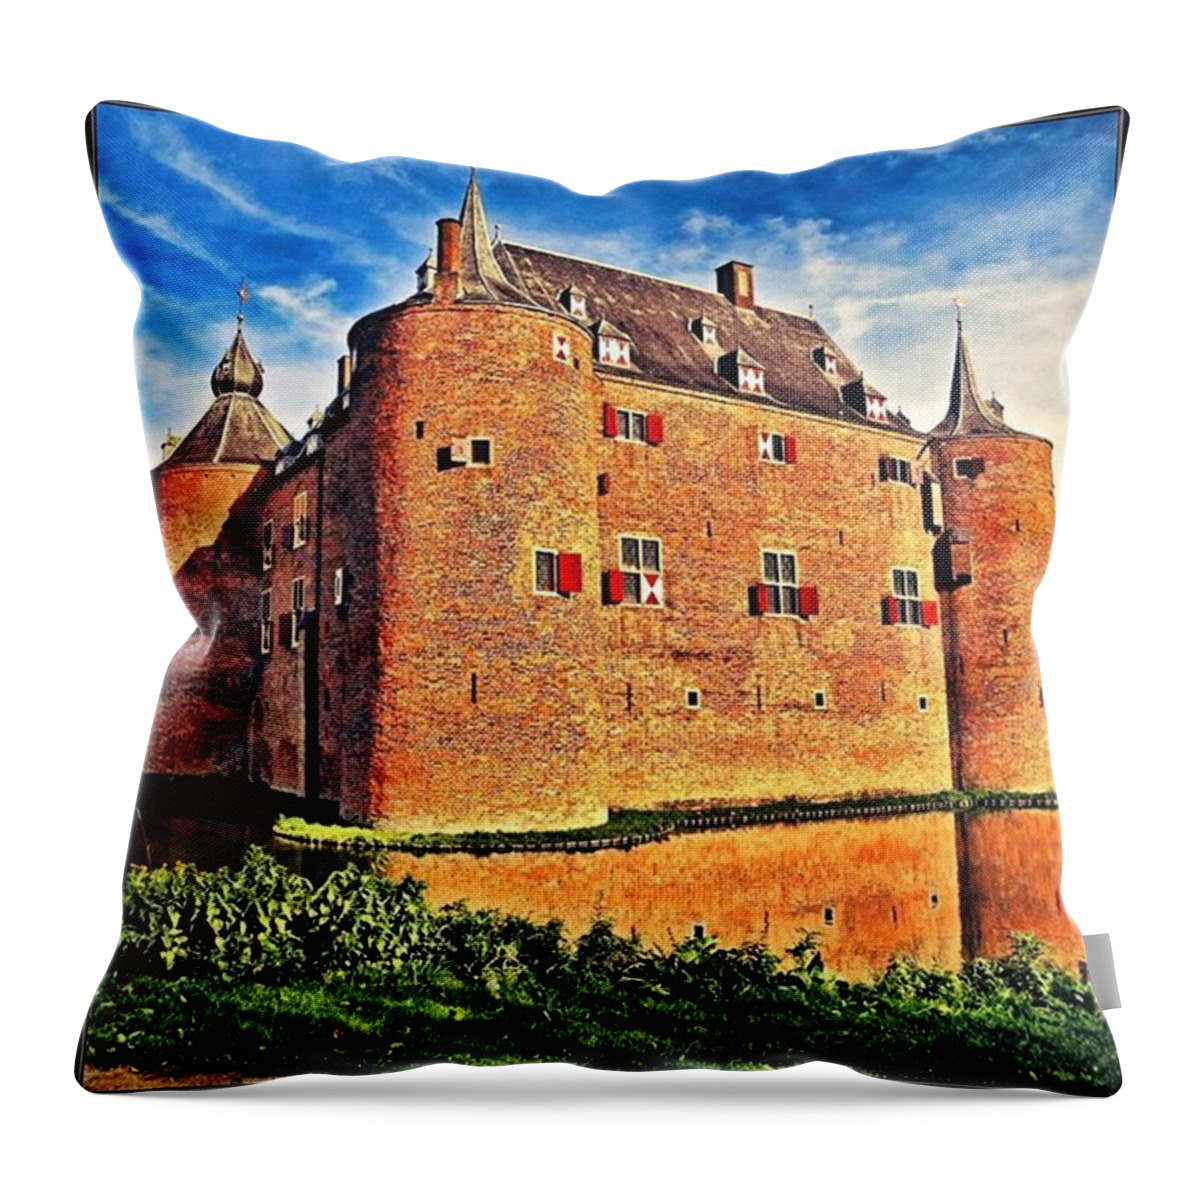 Instagramers Throw Pillow featuring the photograph Waterworks? by Hans Fotoboek